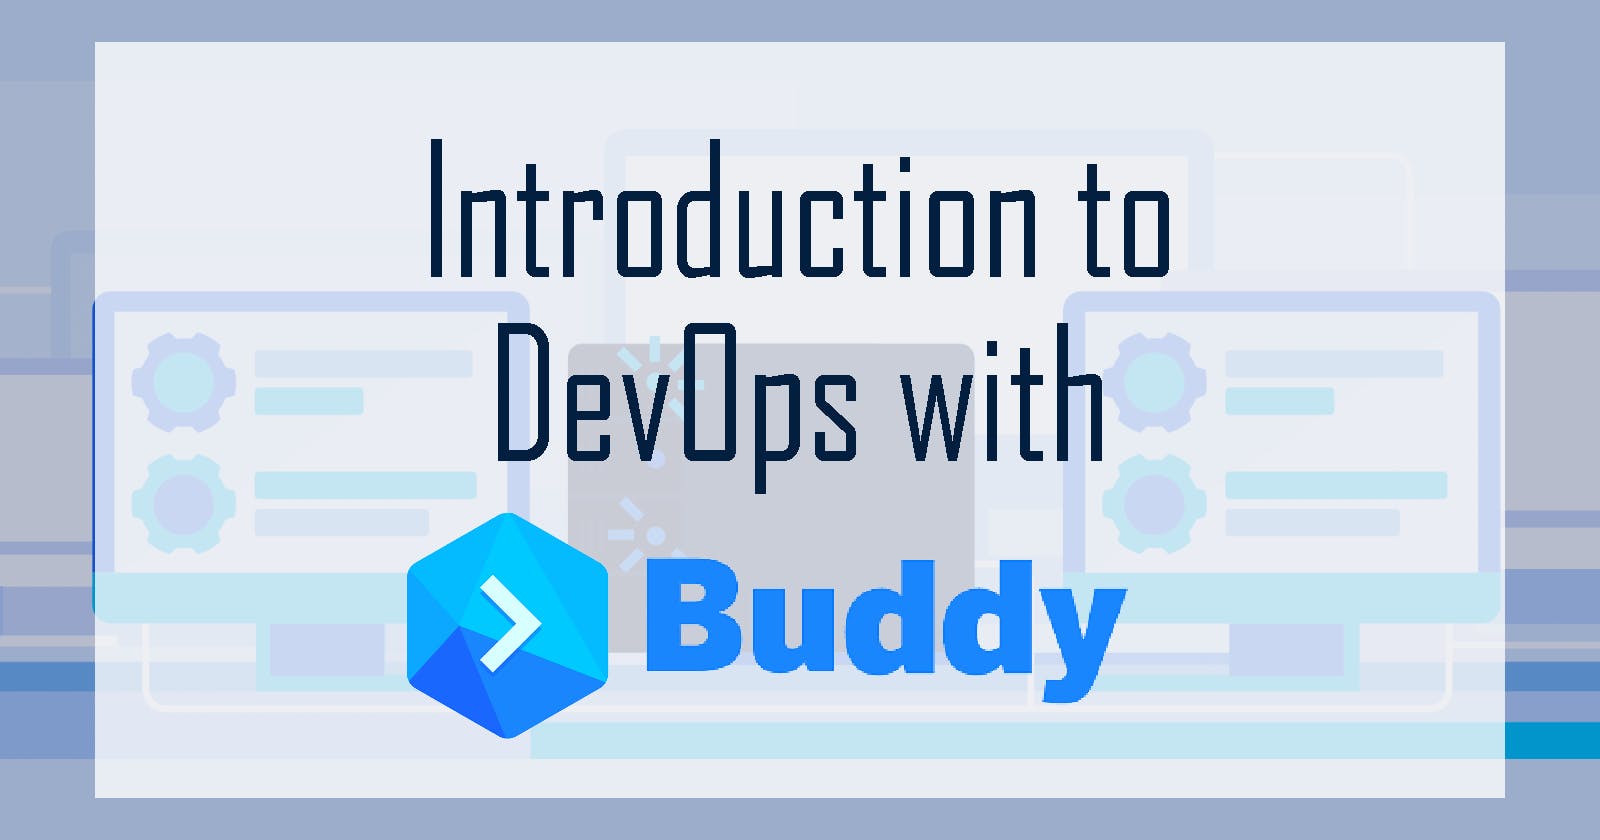 Introduction to DevOps with Buddy